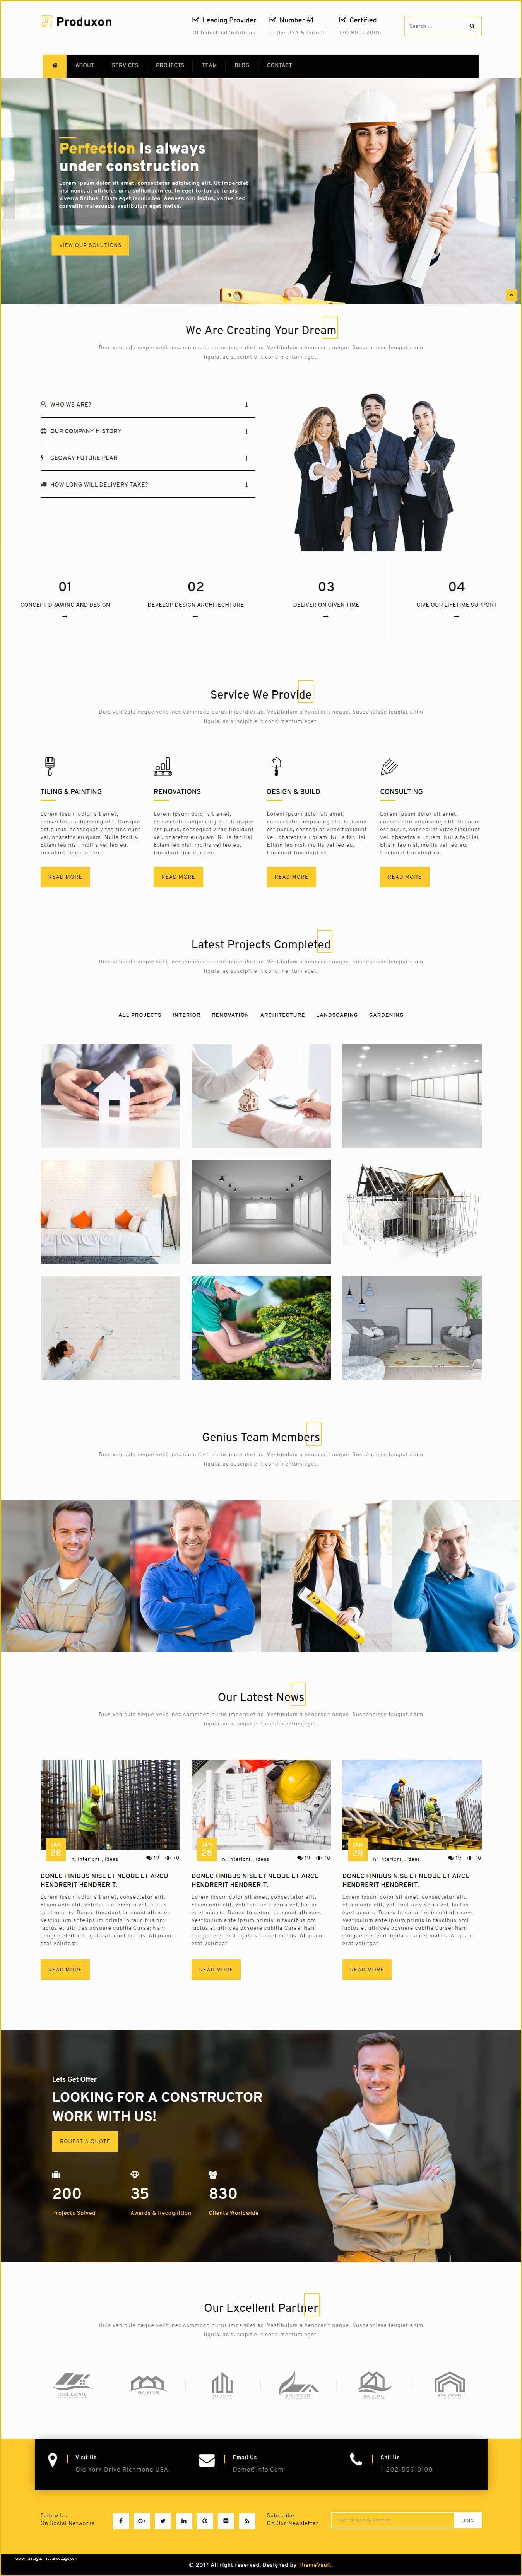 Free Manufacturing Website Templates Of Produxon Responsive Manufacturing Website Templates